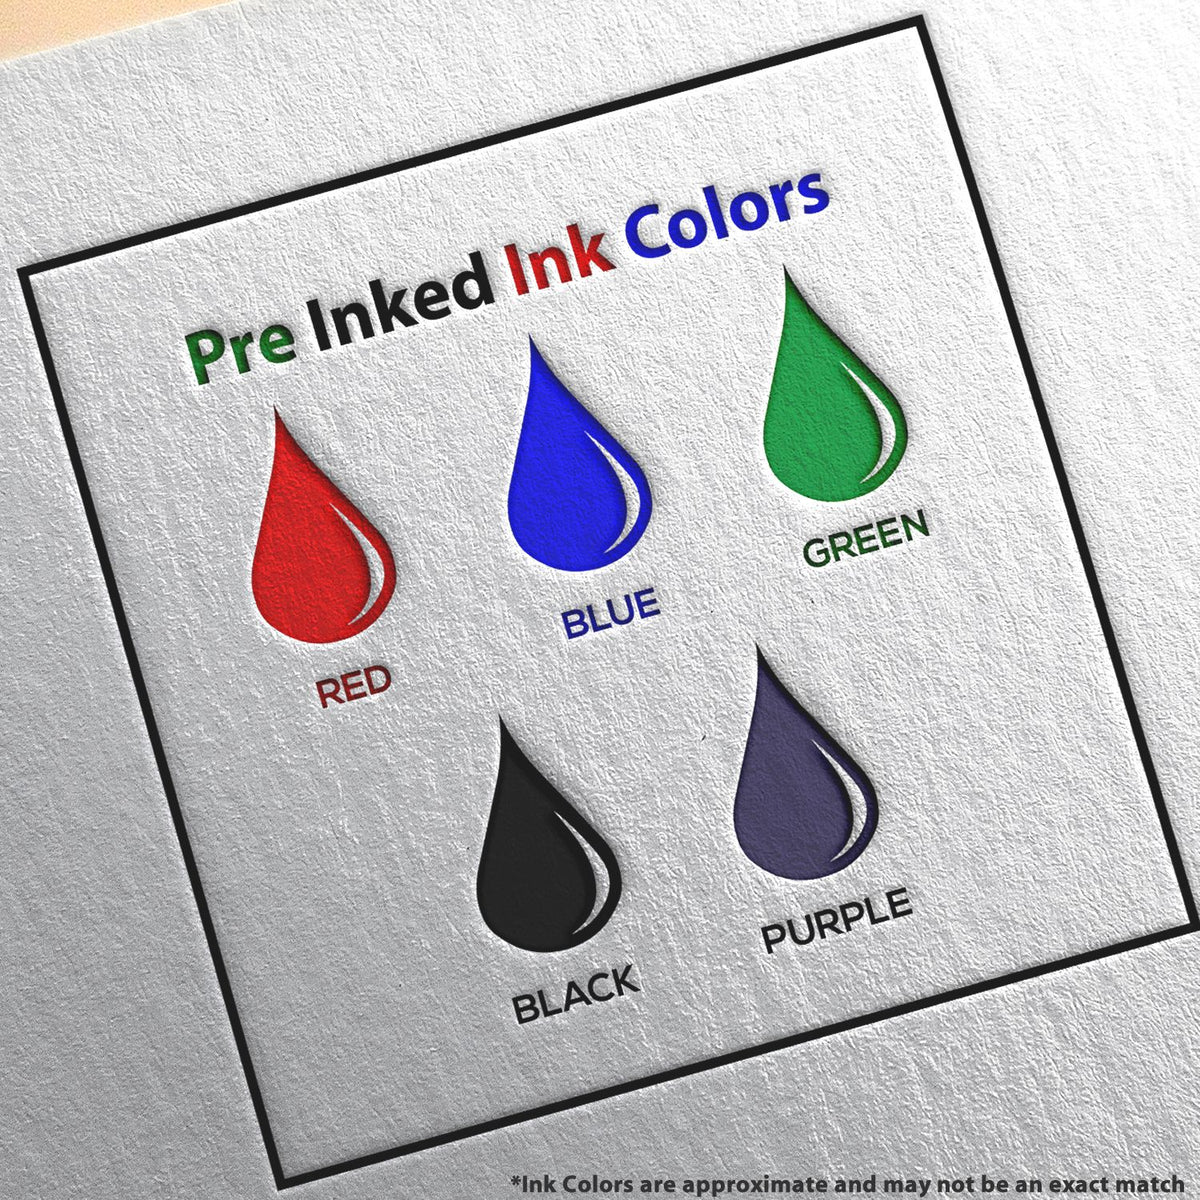 A picture showing the different ink colors or hues available for the Slim Pre-Inked Pennsylvania Architect Seal Stamp product.